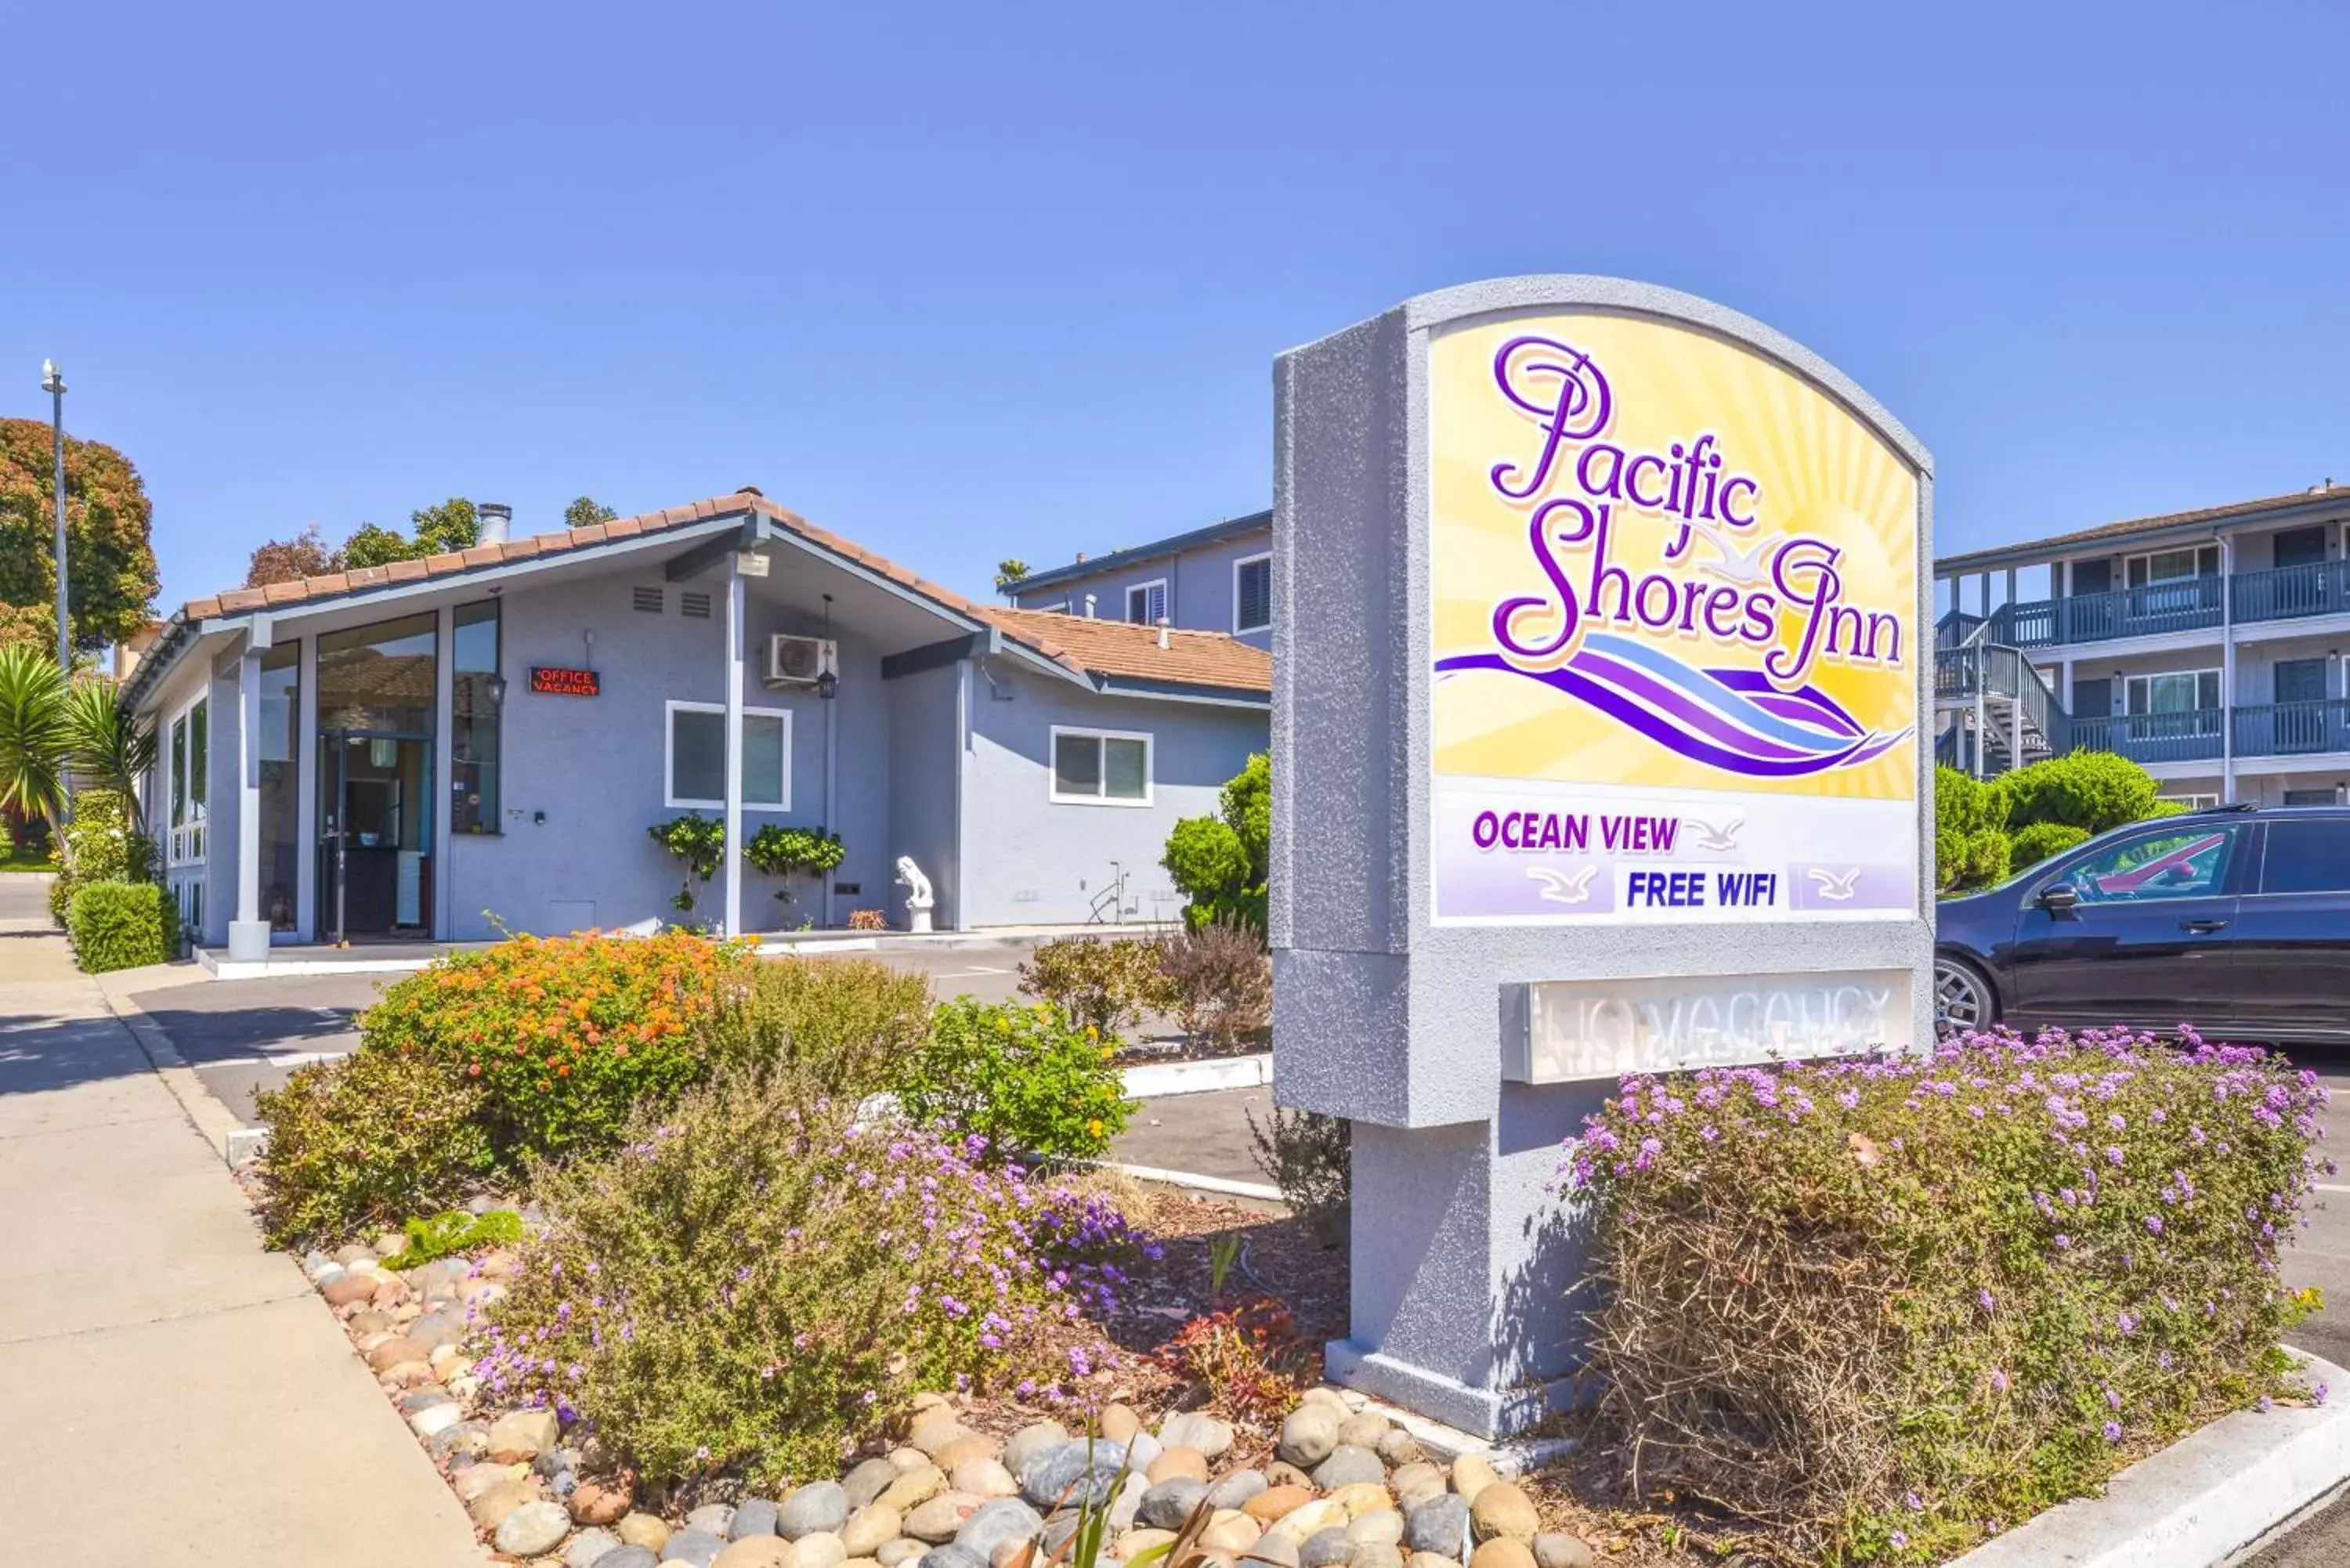 Property Building in Pacific Shores Inn - Morro Bay